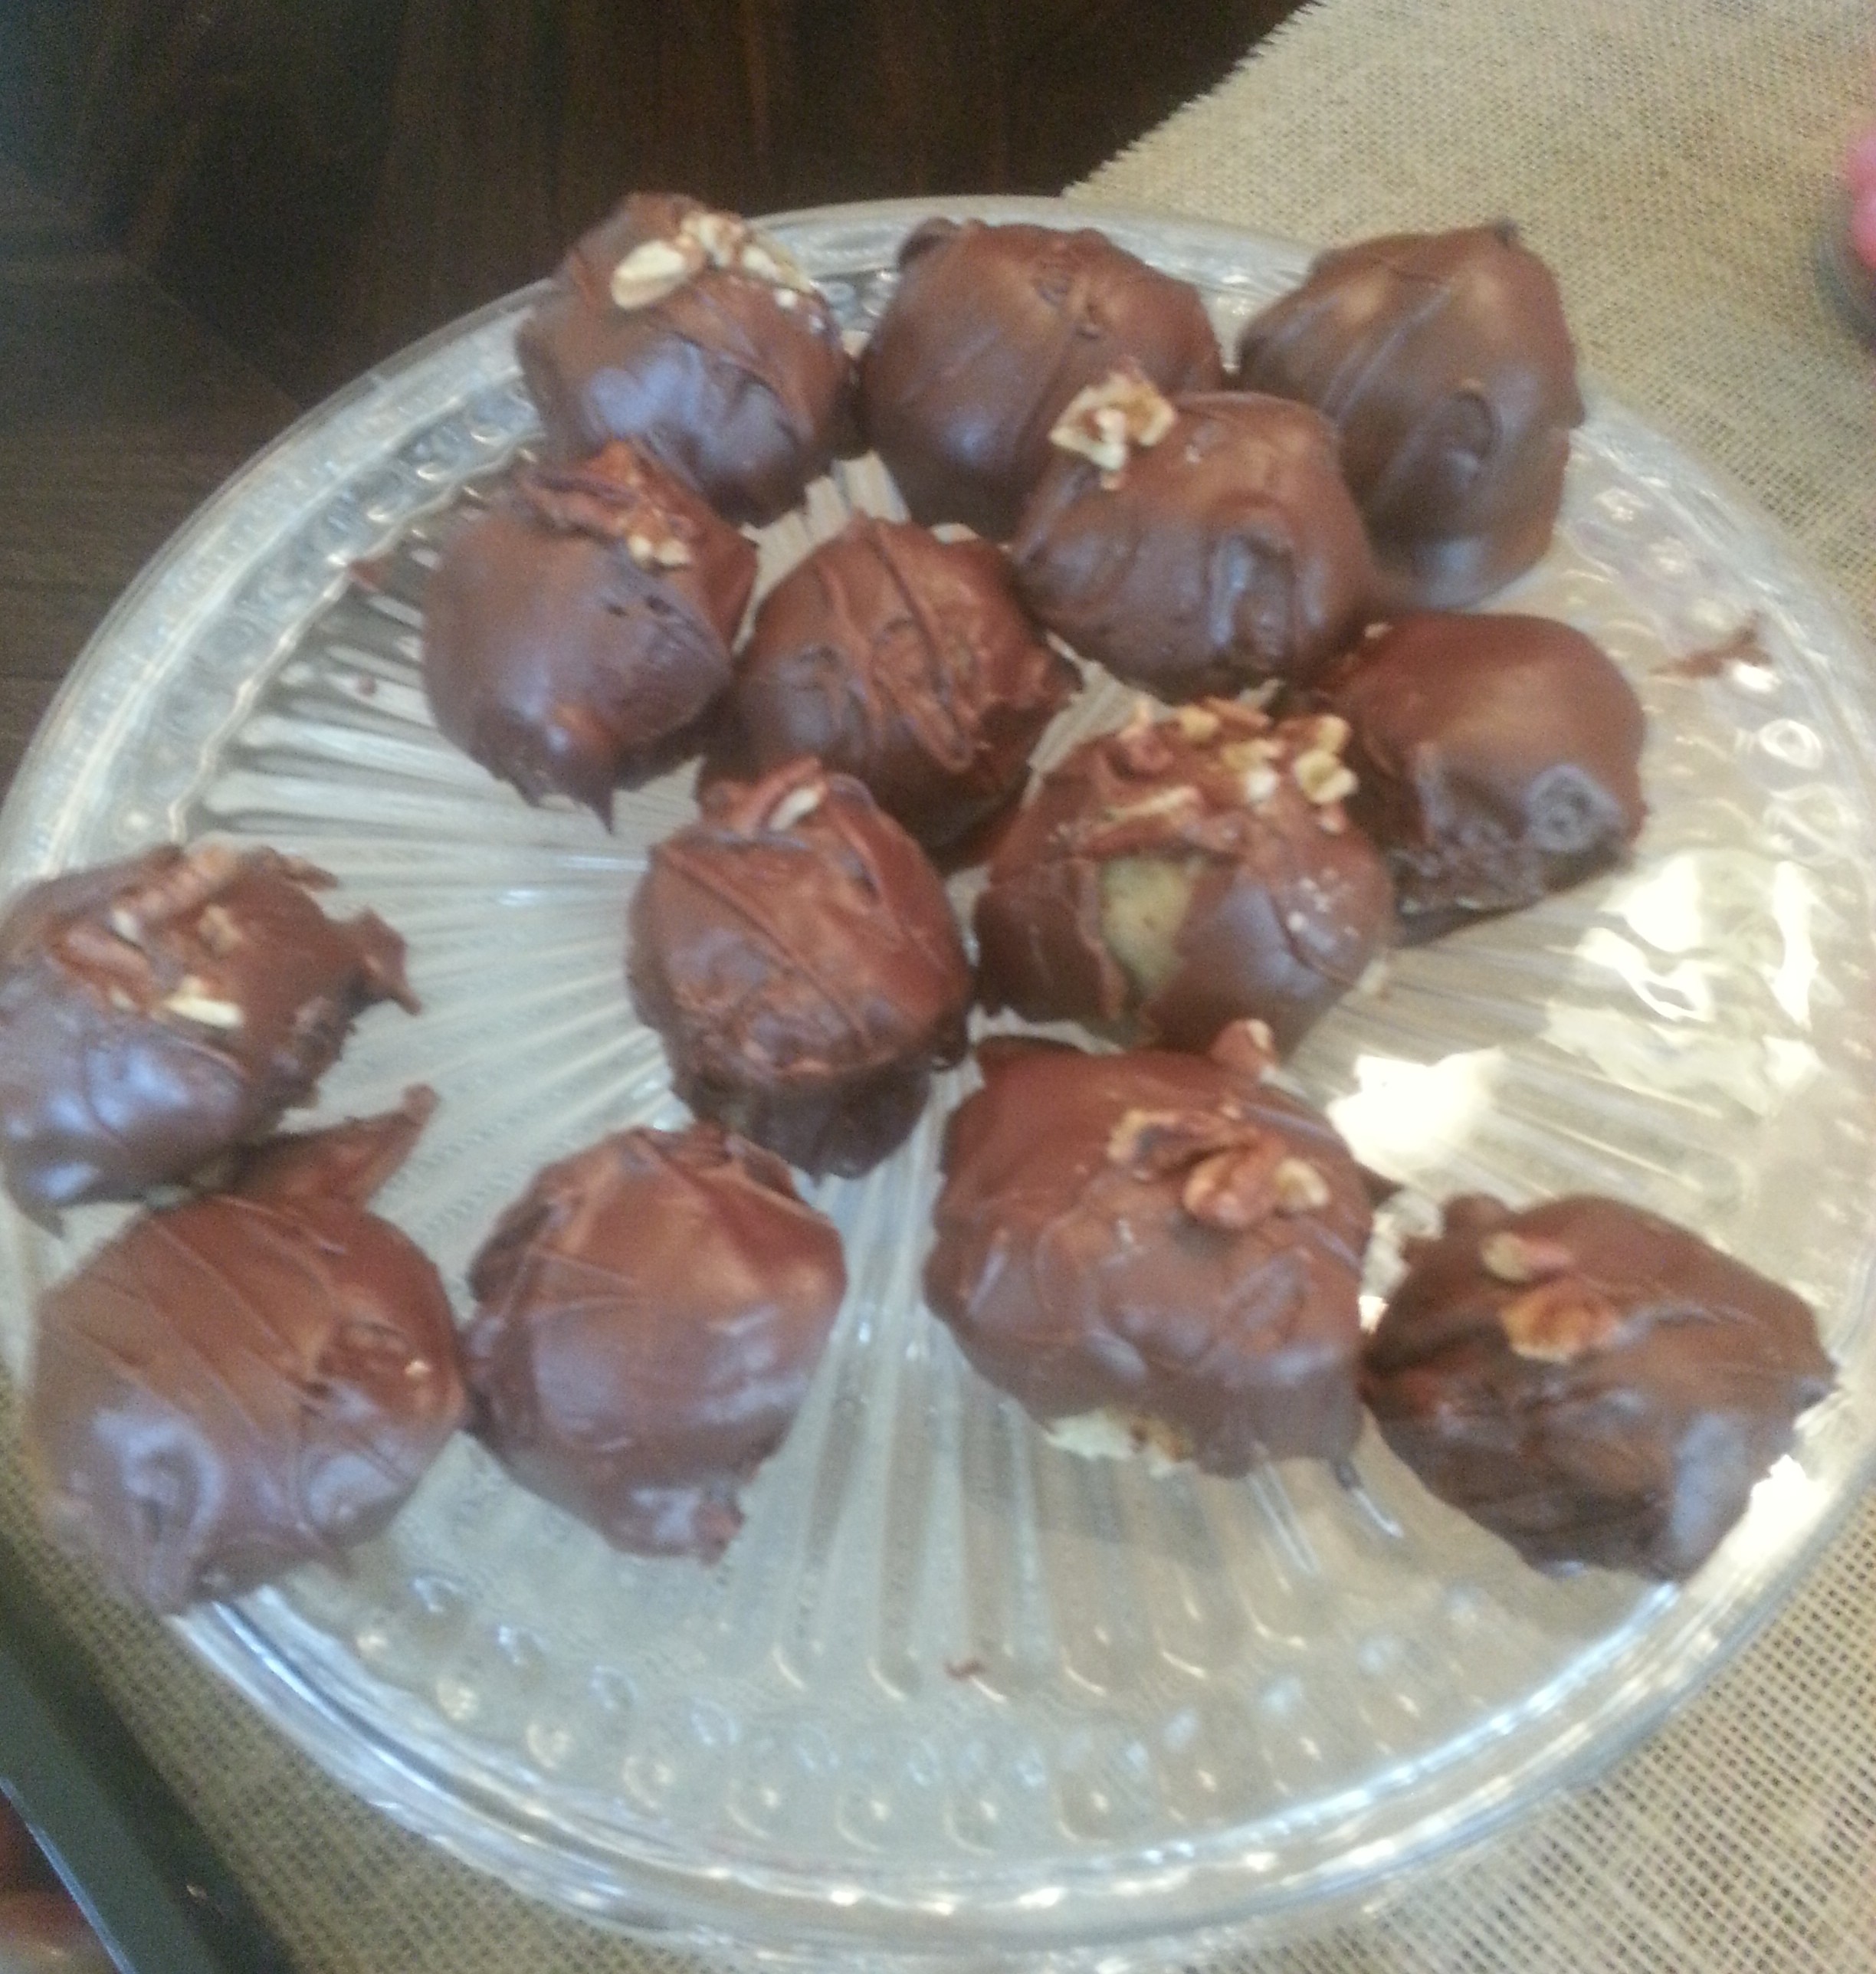 Chocolate balls of deliciousness